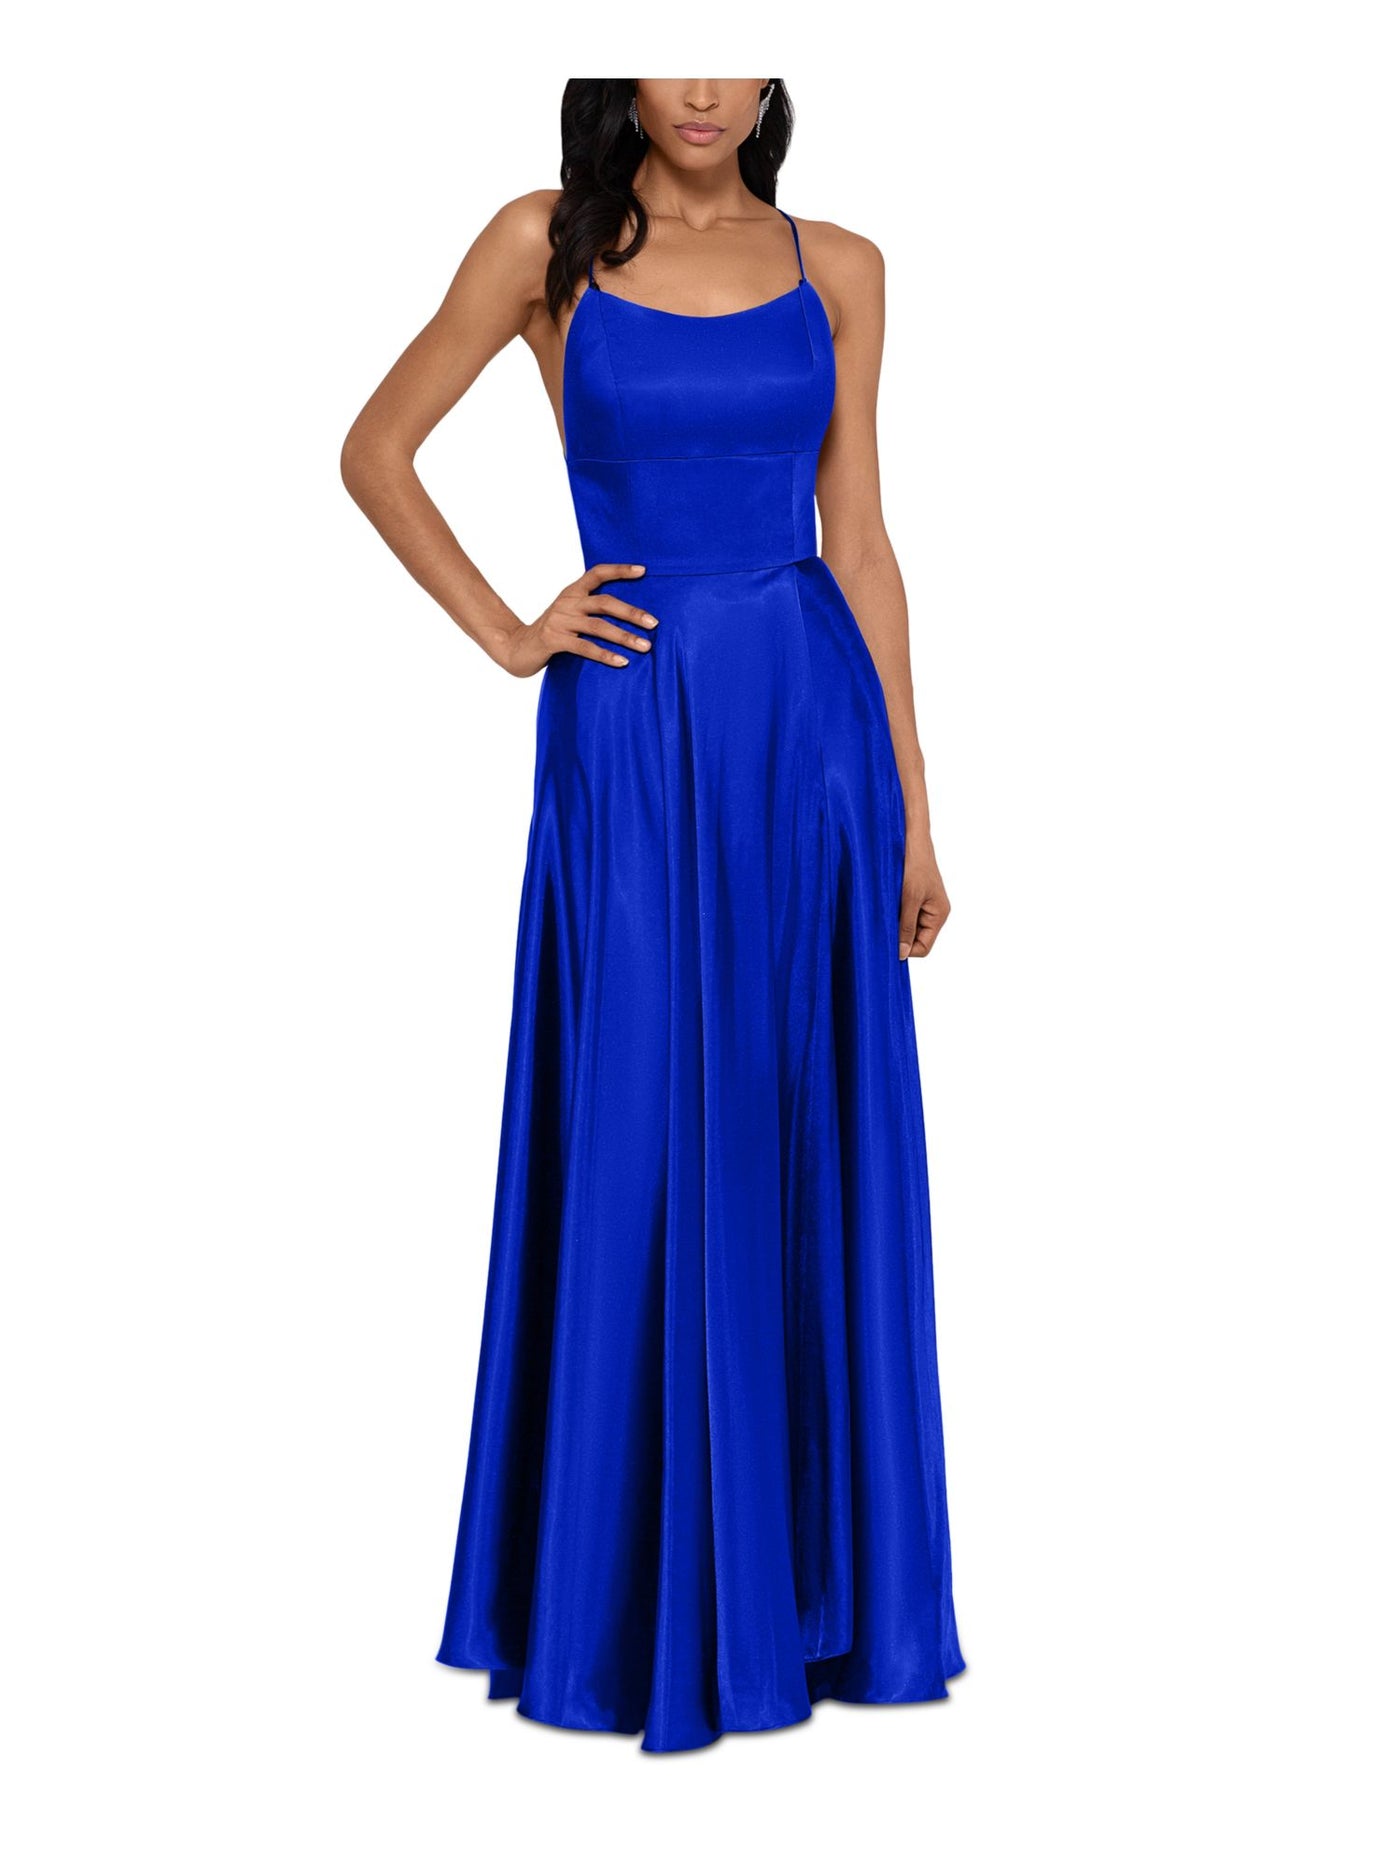 B&A  BY BETSY & ADAM Womens Blue Zippered Pocketed Tie Open Back Lined Spaghetti Strap Scoop Neck Full-Length Formal Gown Dress 0